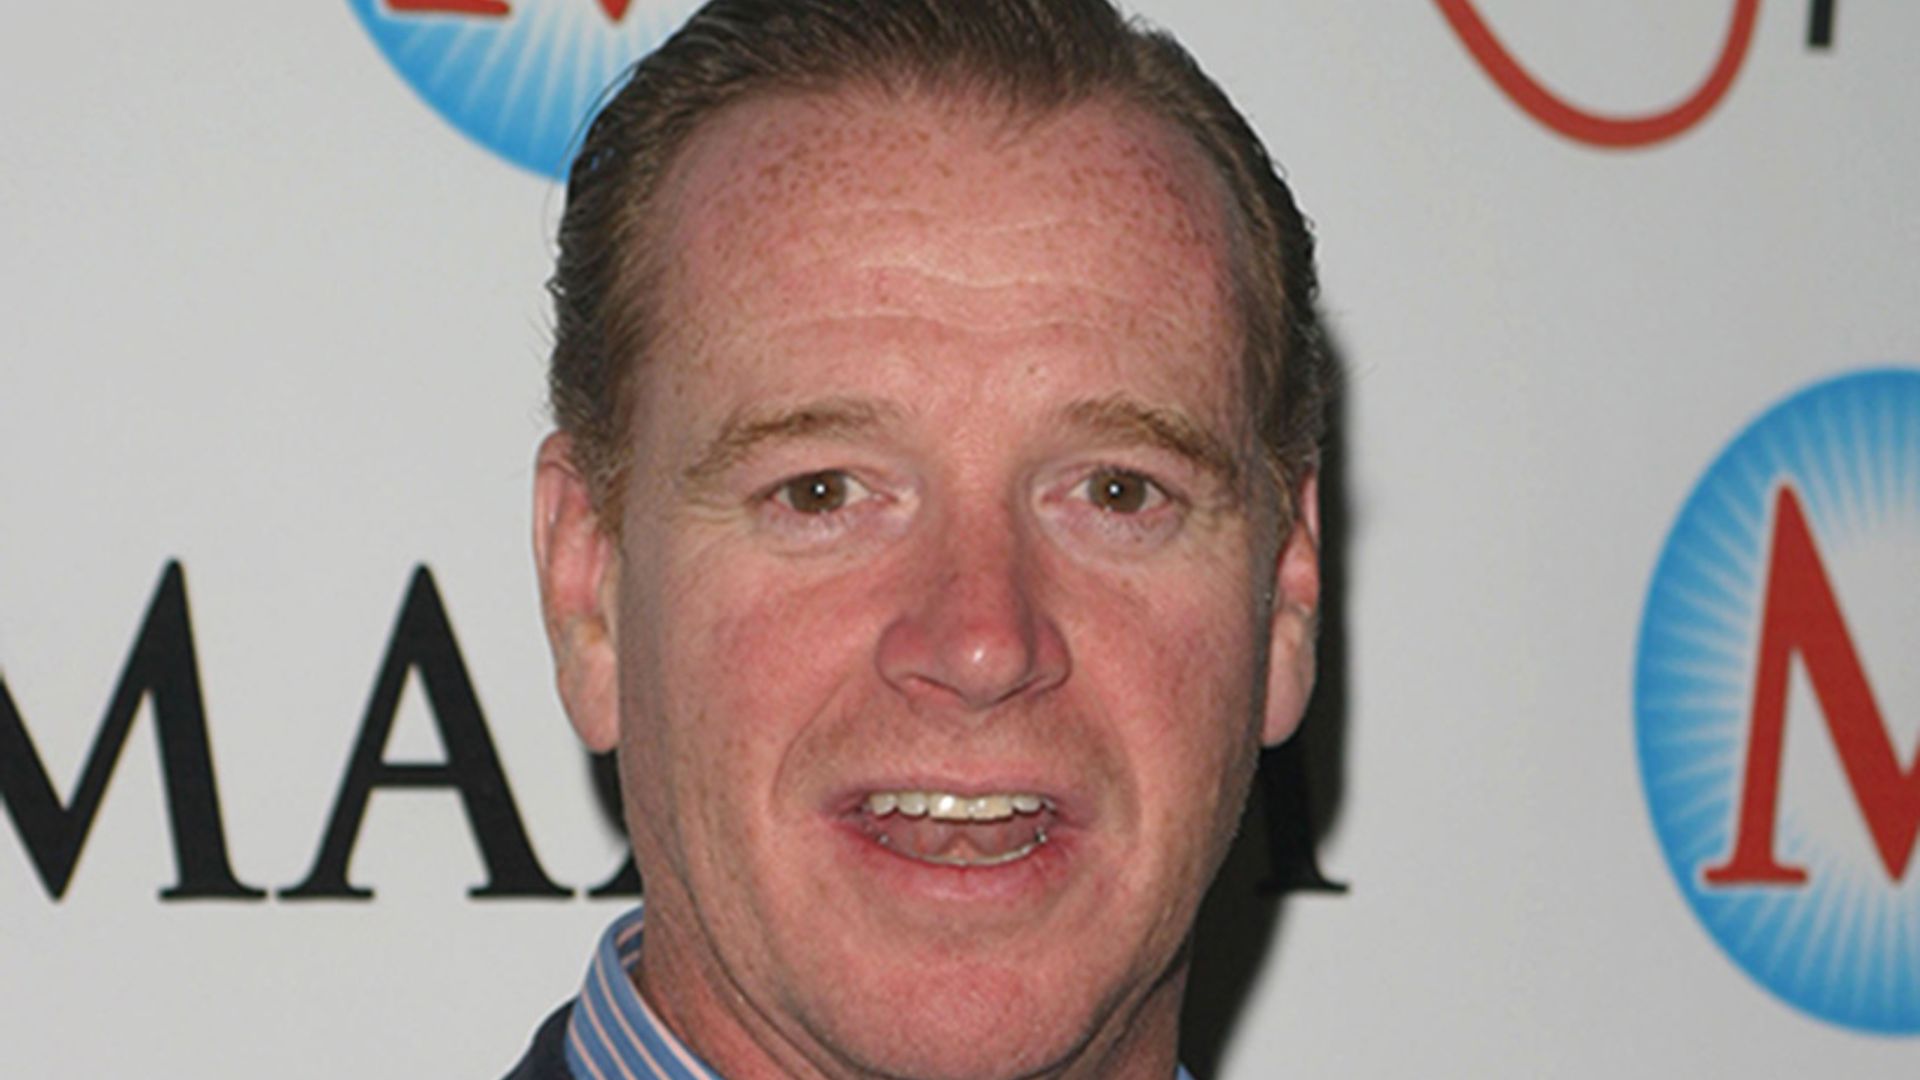 James Hewitt has emergency surgery following heart attack and stroke